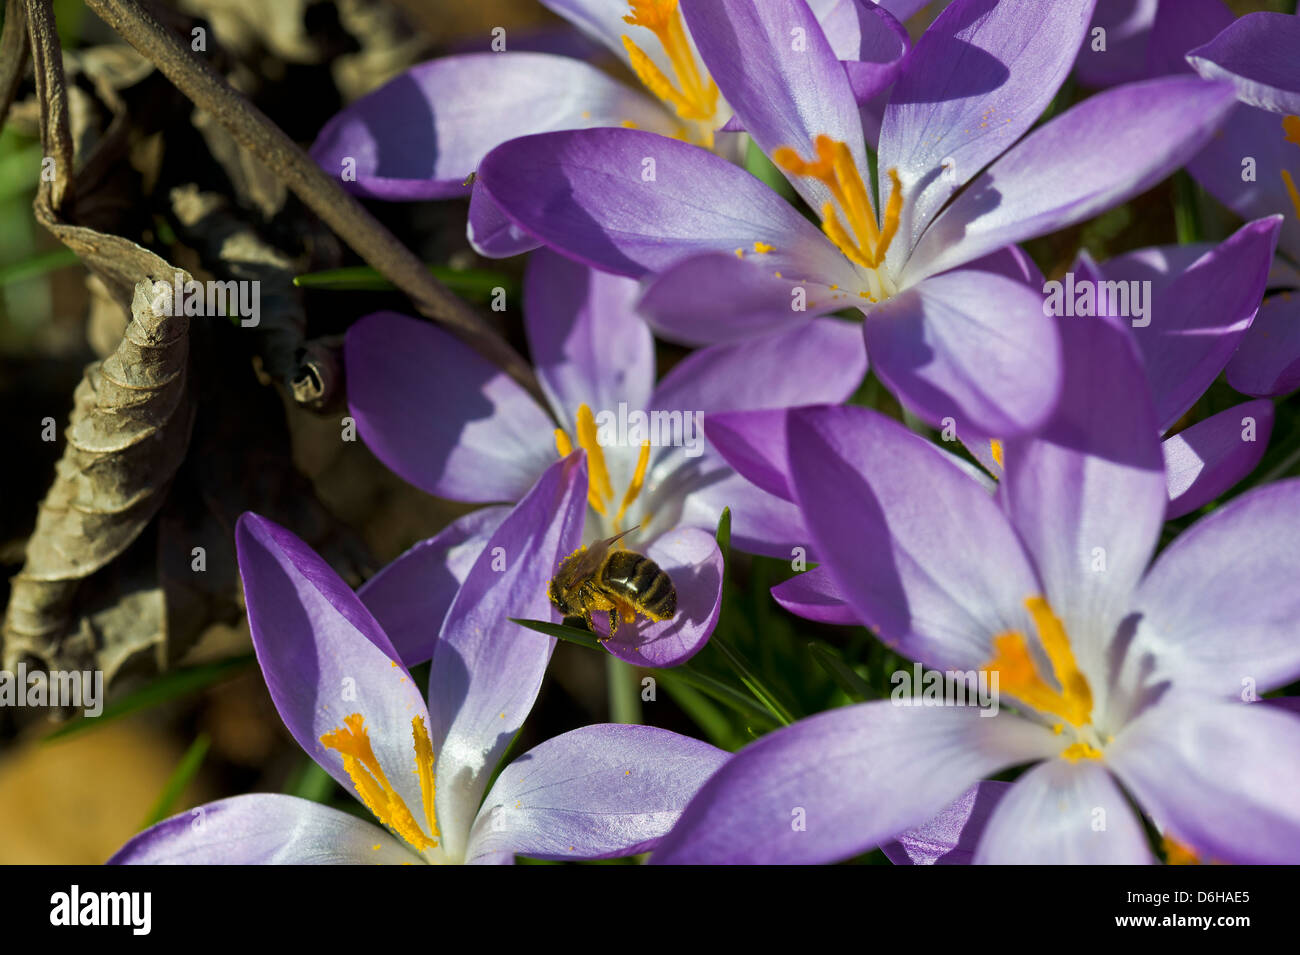 Group of blue crocus flowers in sun with pollinating bee Stock Photo